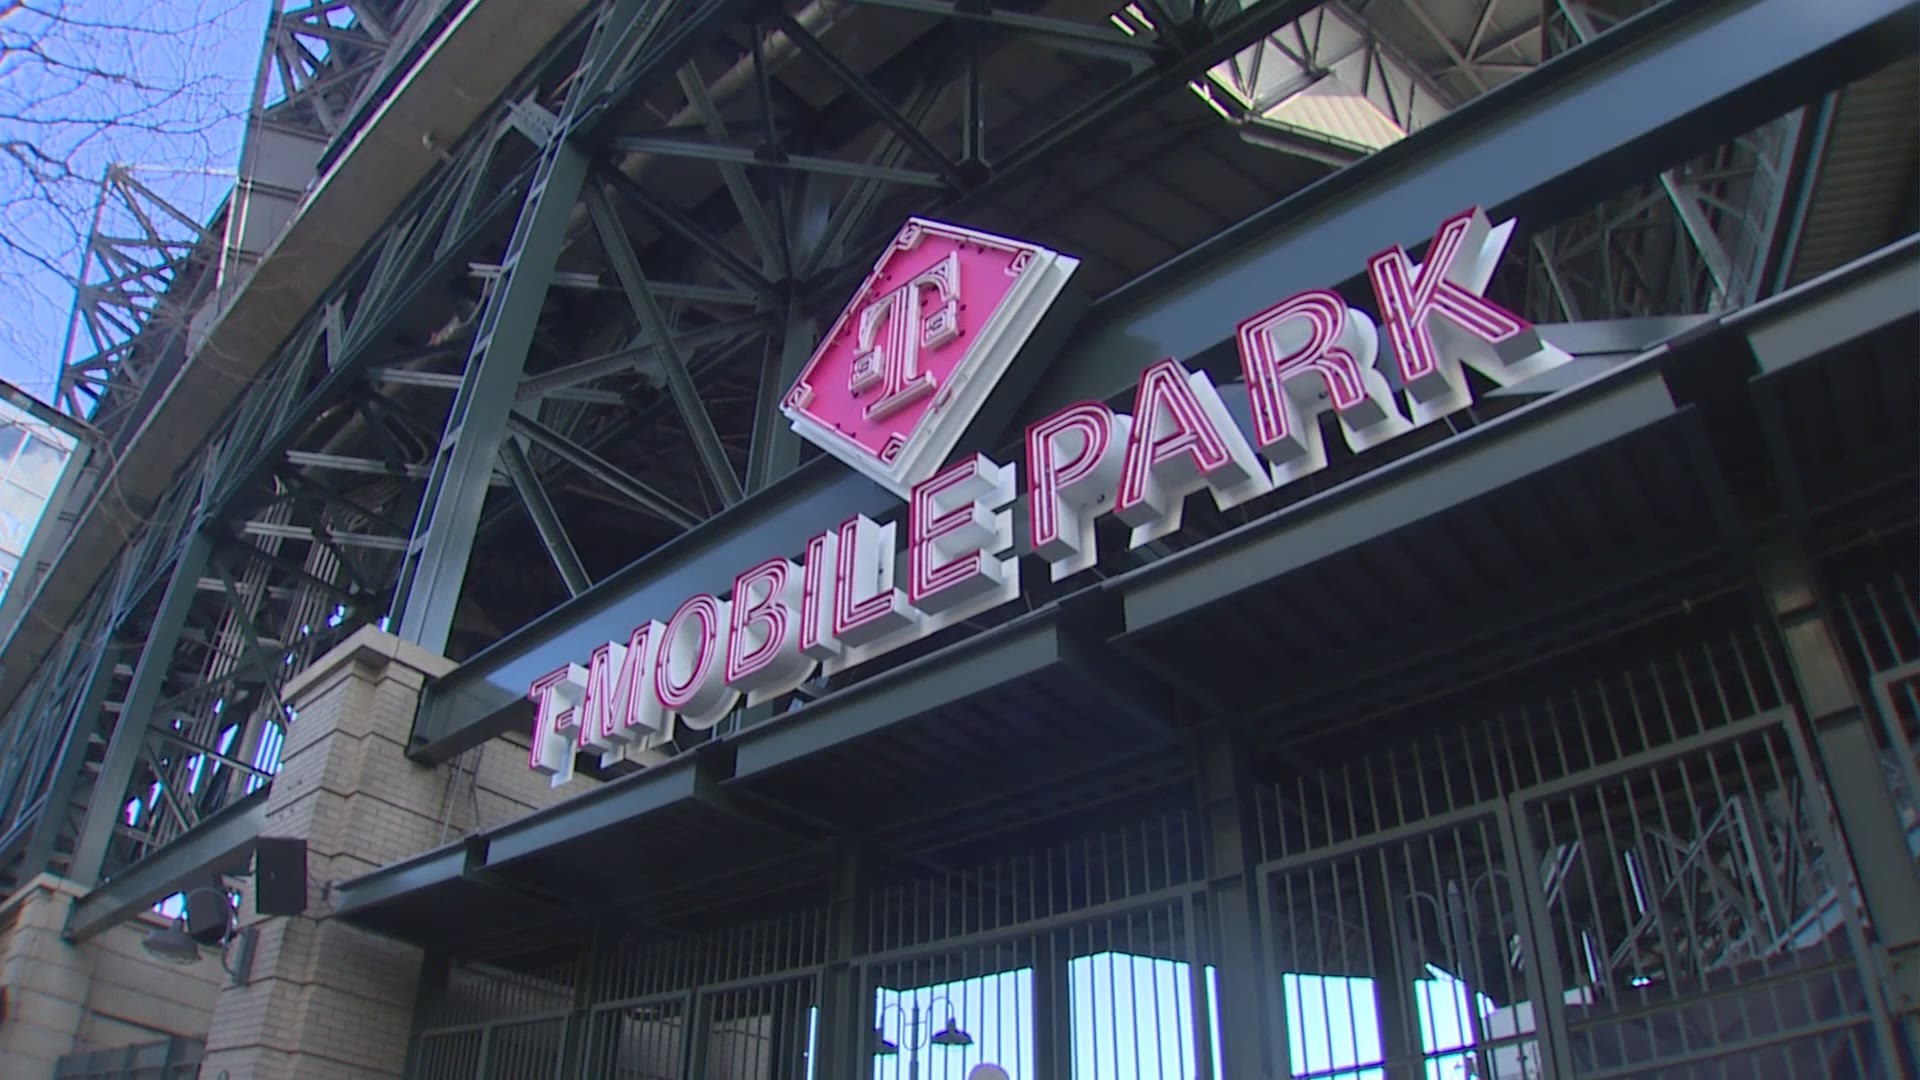 Signs for T-Mobile Park are replacing Safeco Field signage ahead of the Mariners home opener in late March.